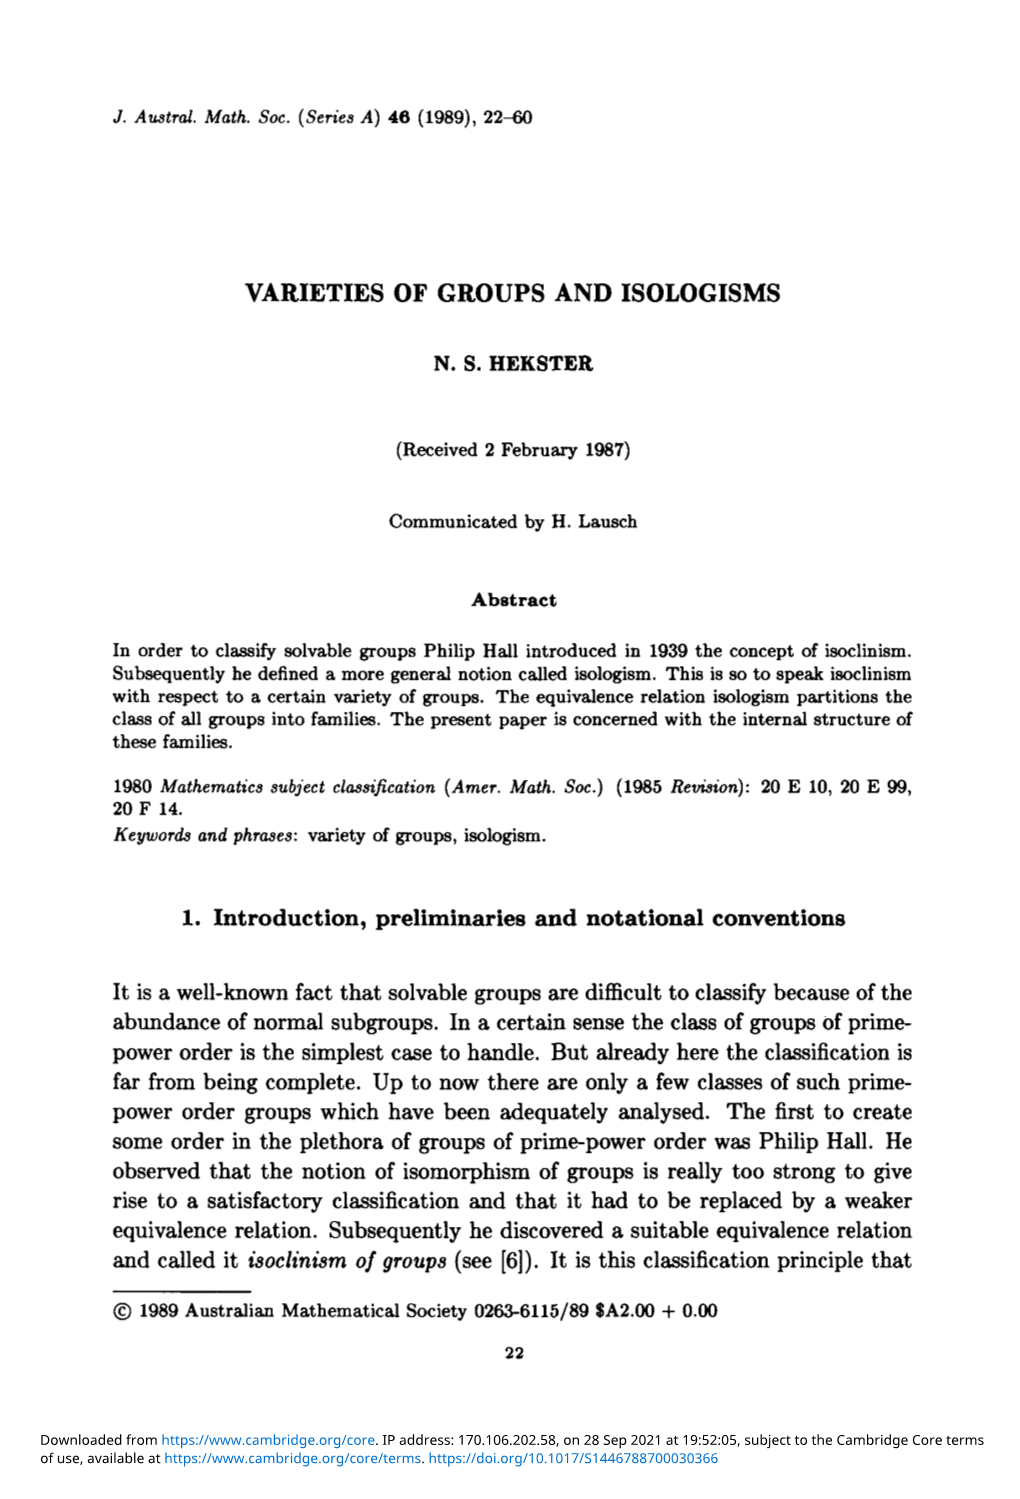 Varieties of Groups and Isologisms